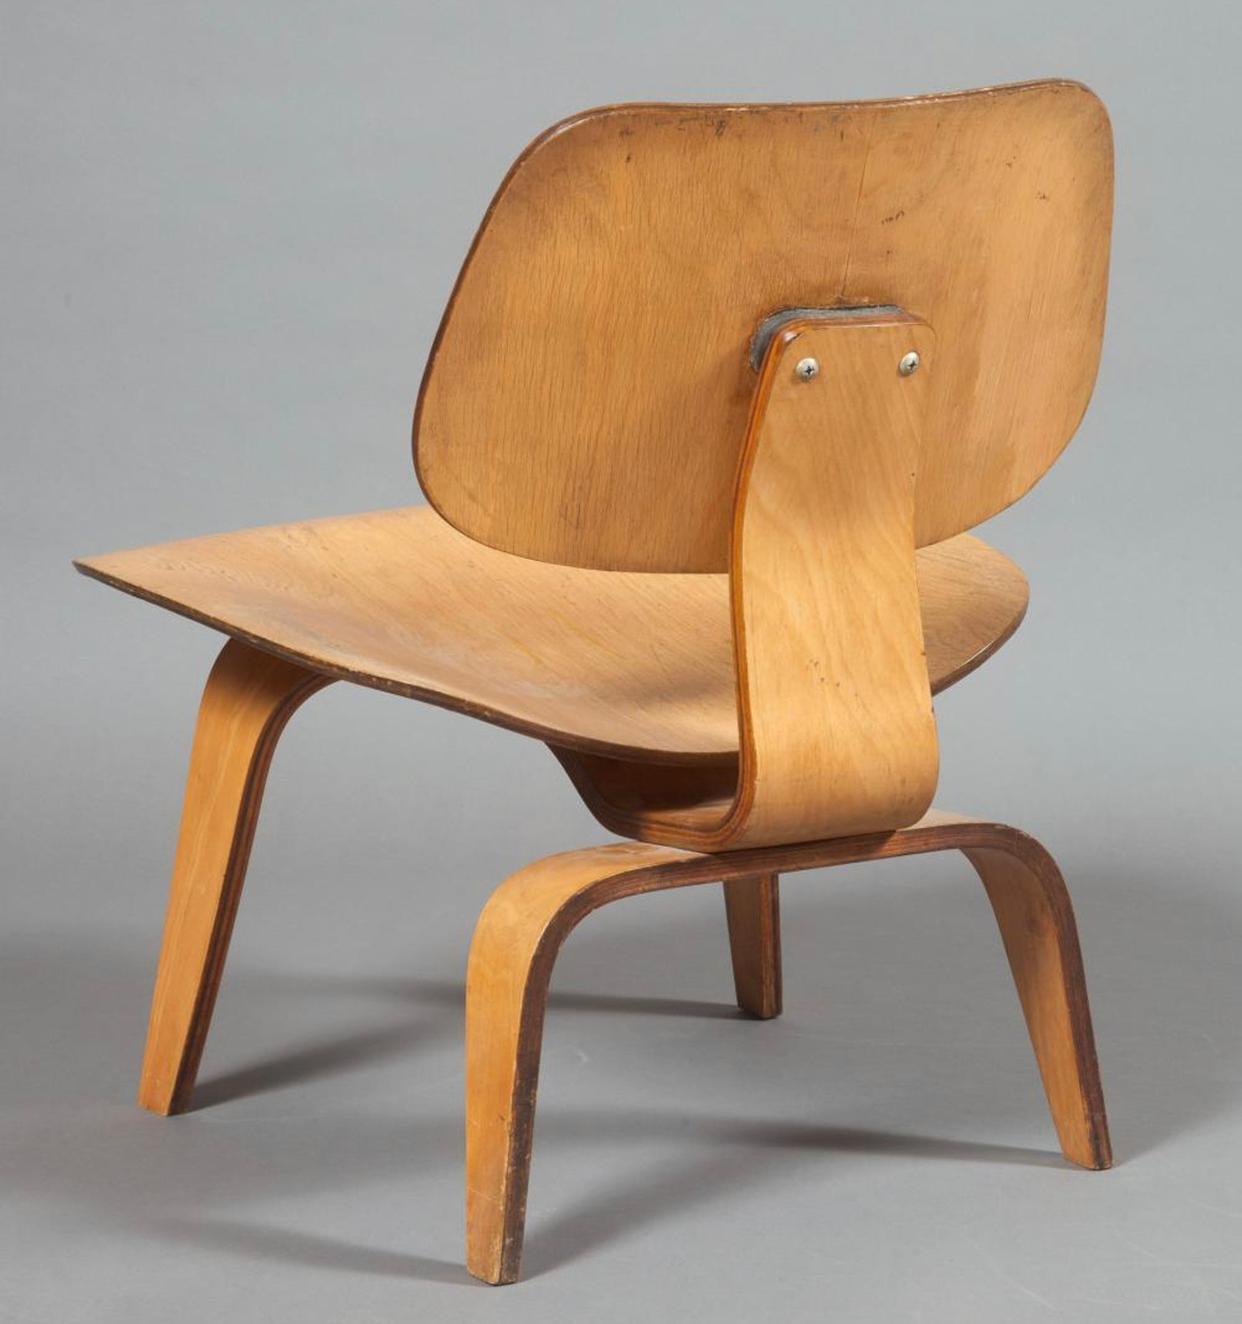 Gorgeous and rare early example of perhaps the most iconic modernist chair. 1940s edition executed in birch. Manufactured by Evans Products before Herman Miller took over manufacture circa 1950. In good condition with age expected wear and